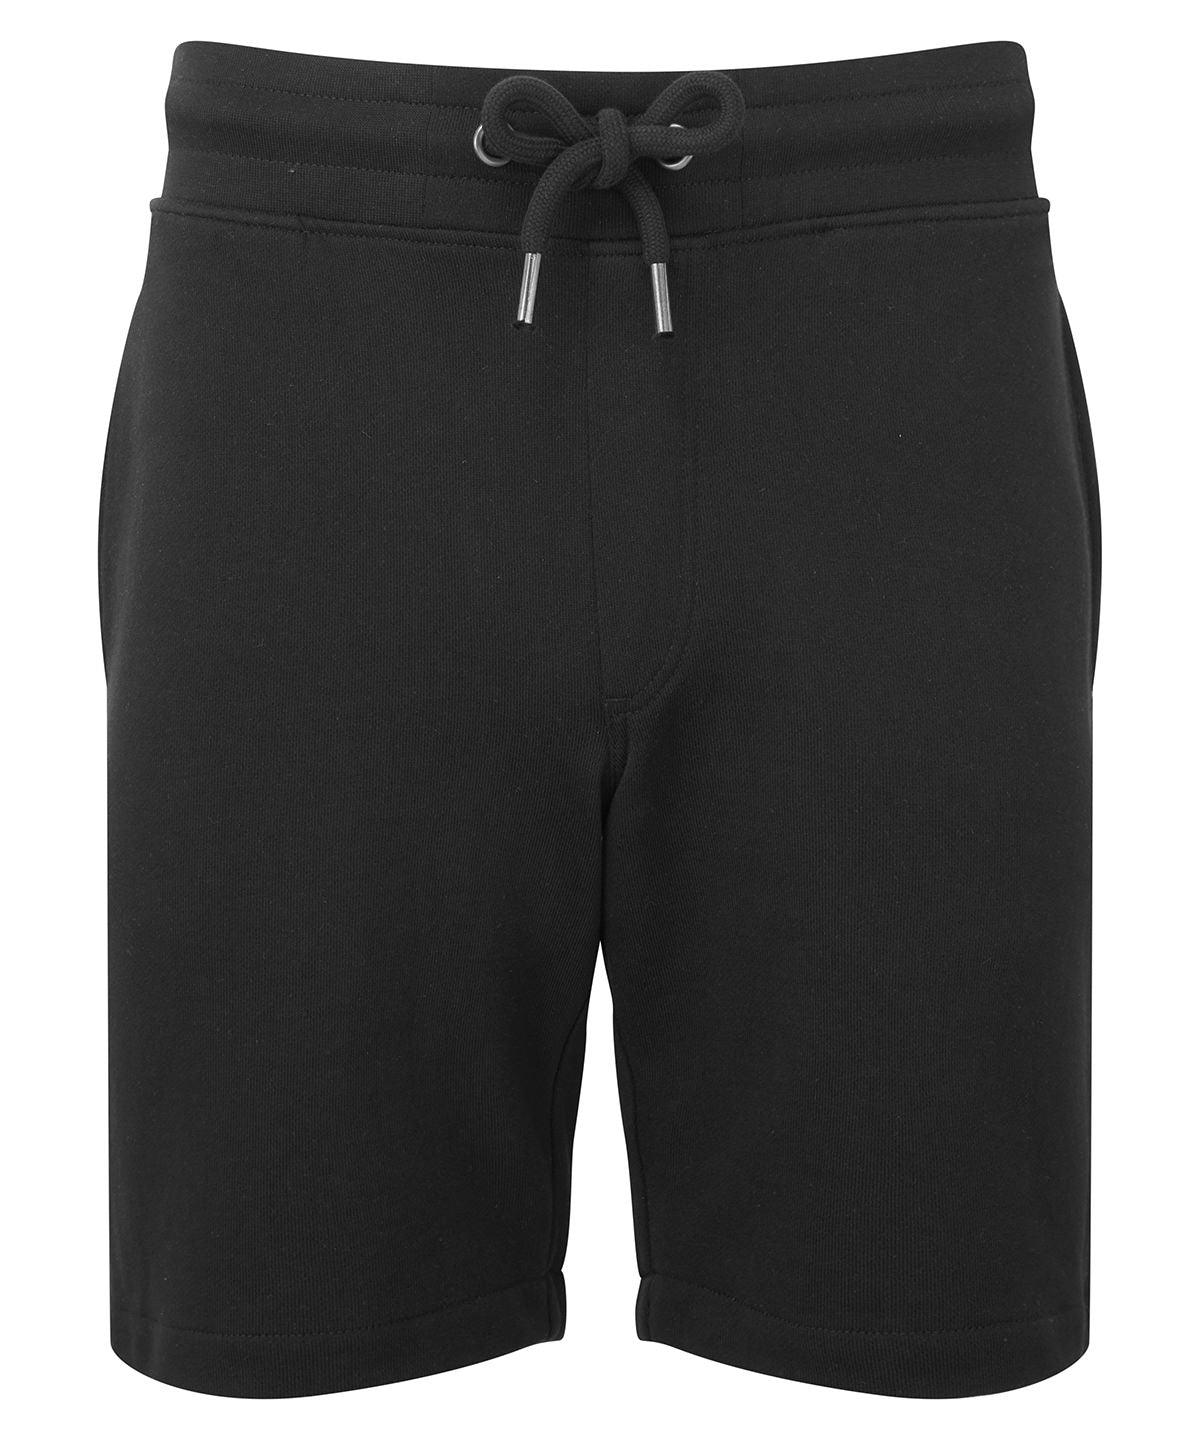 Black - Men’s Recycled Jersey shorts Shorts Wombat New Styles for 2023, Organic & Conscious, Rebrandable, Trousers & Shorts Schoolwear Centres